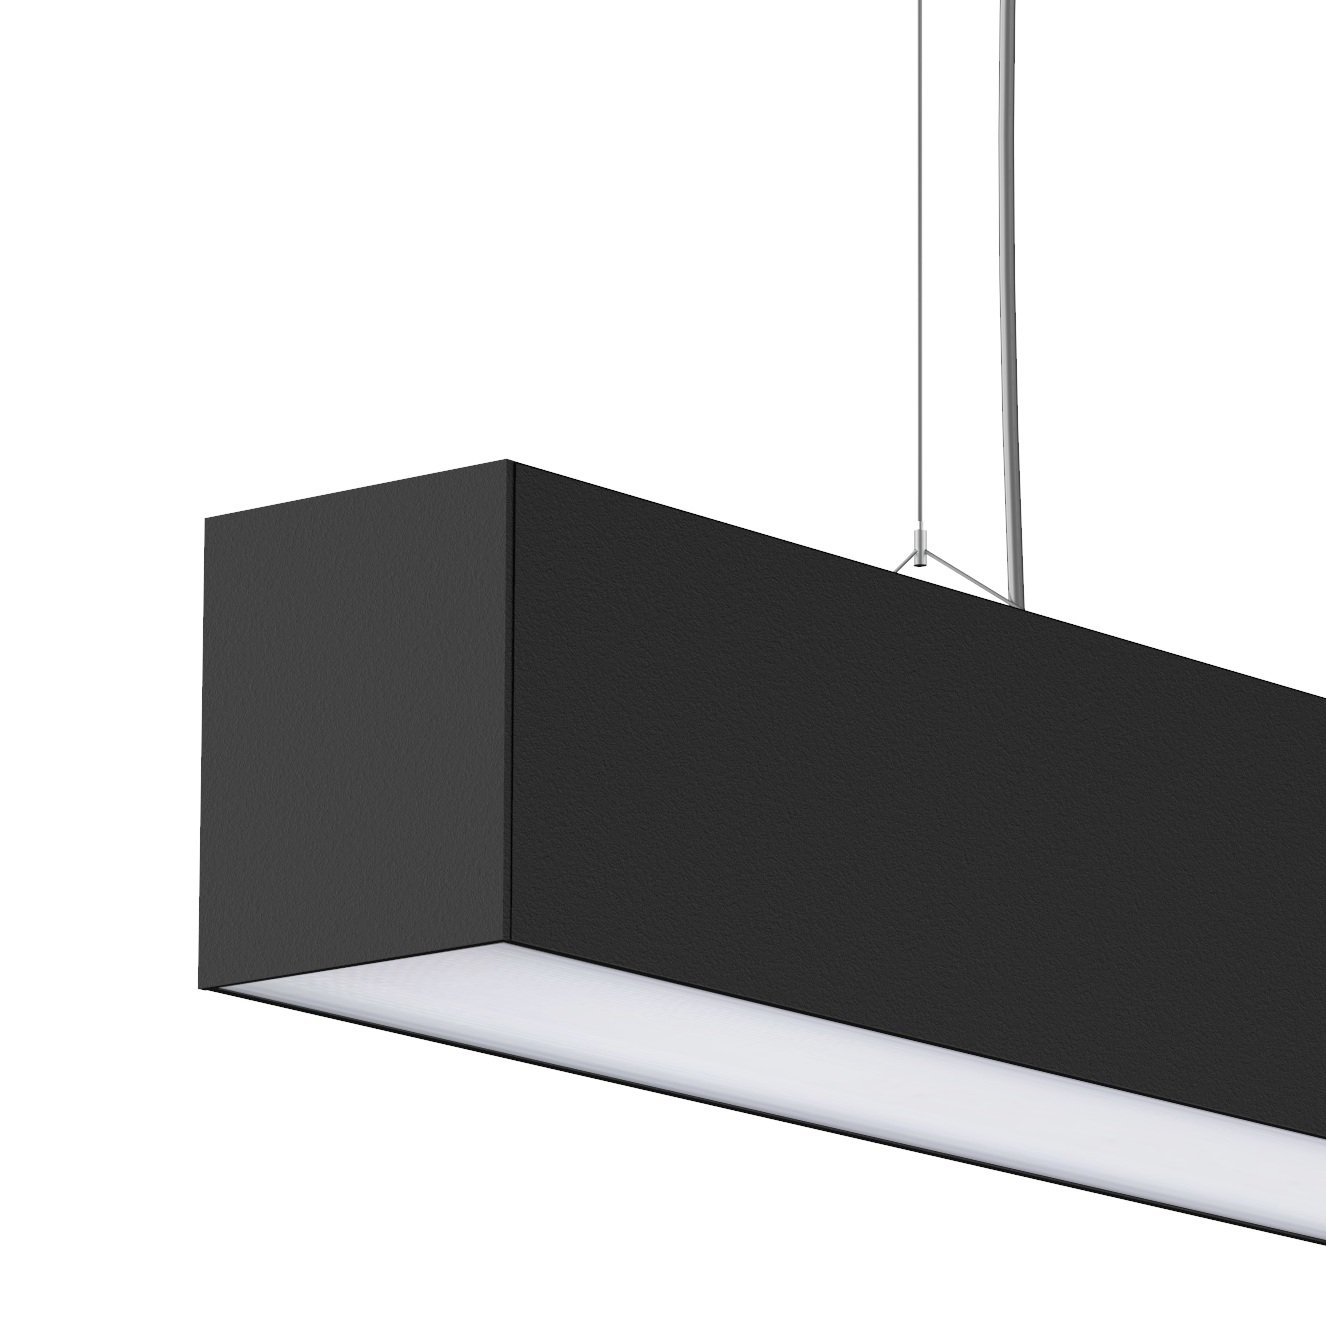 Suspended direct lighting products